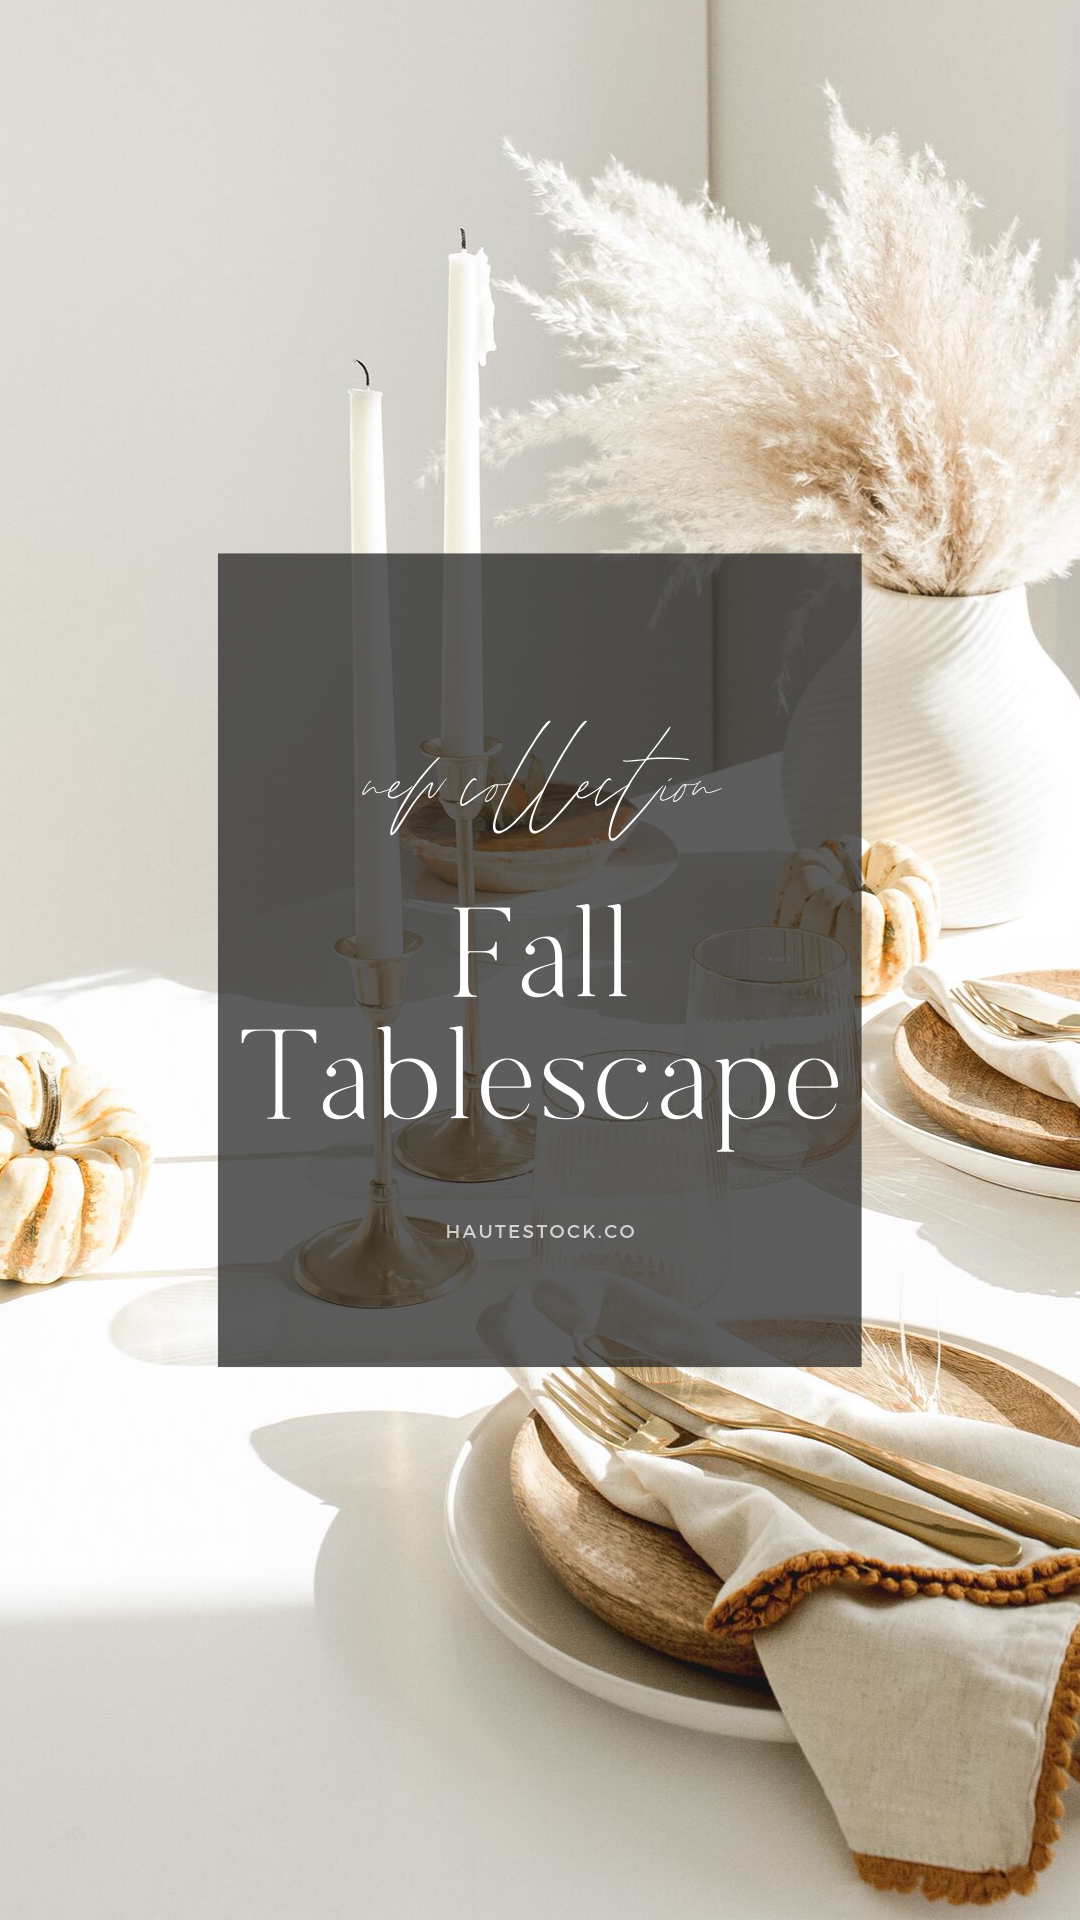 Warm neutral Fall tablescape decor stock photos that are perfect for Thanksgiving and Fall decorating posts. Exclusively from Haute Stock. Click to view the collection.